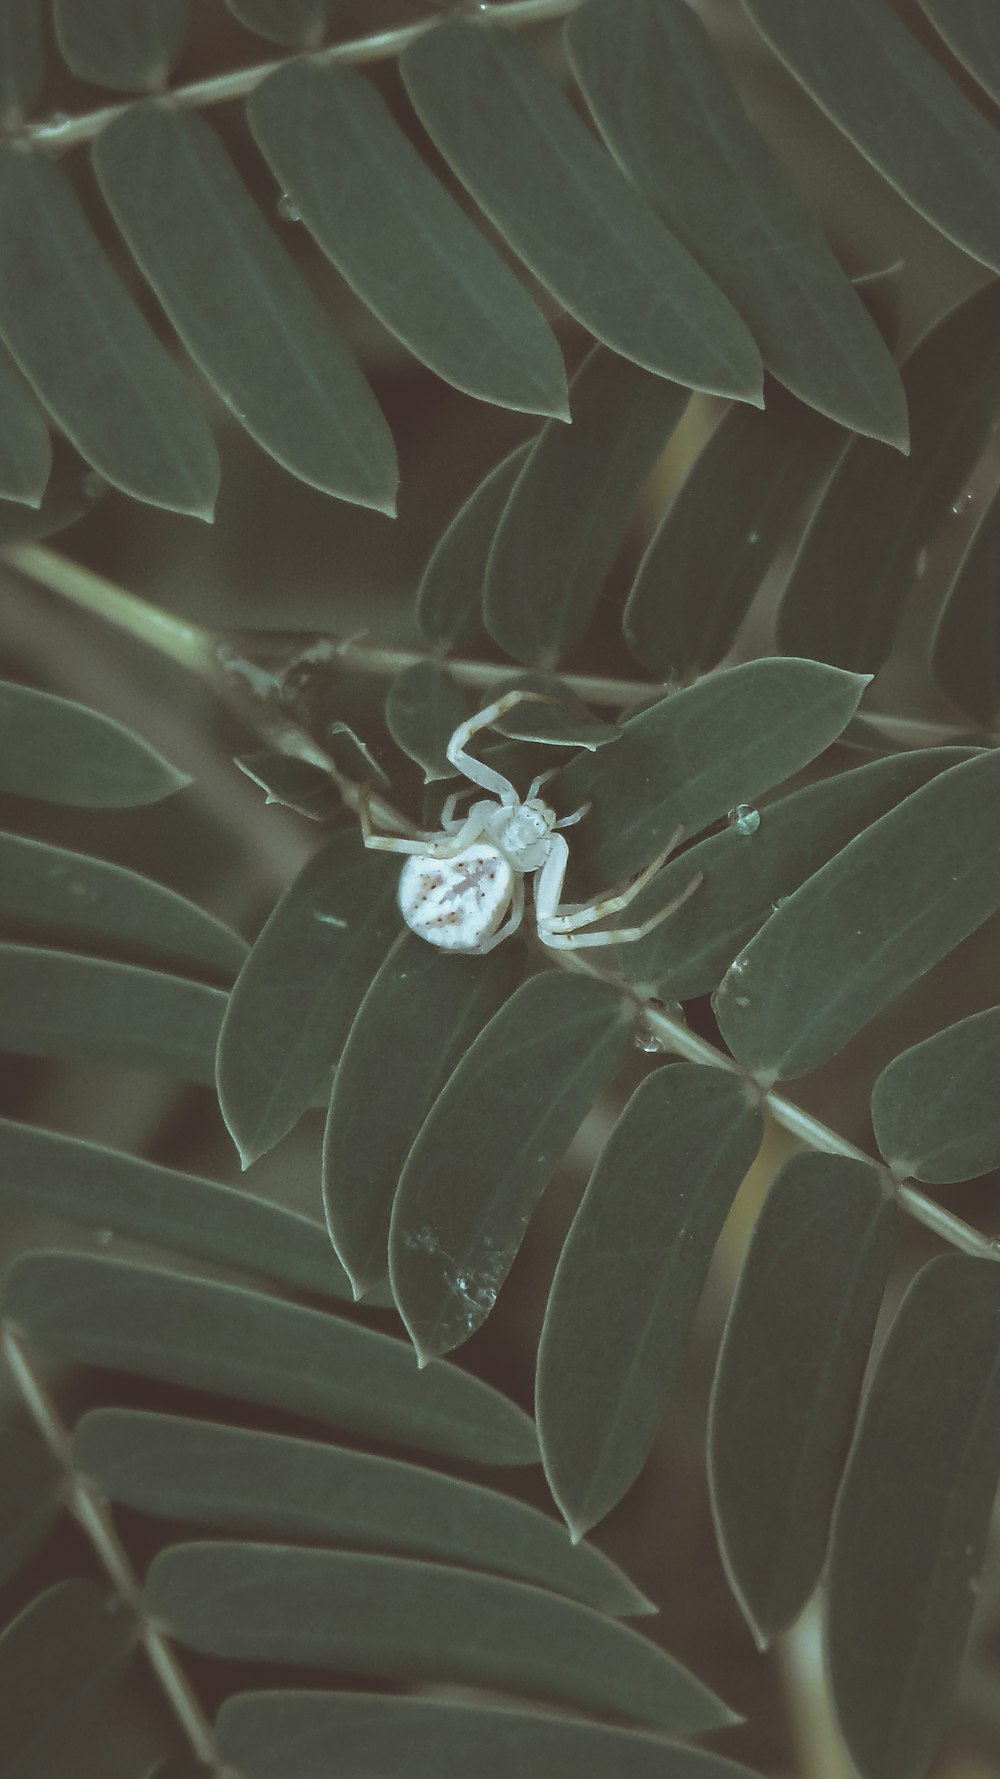 brown spider on white and green leaf